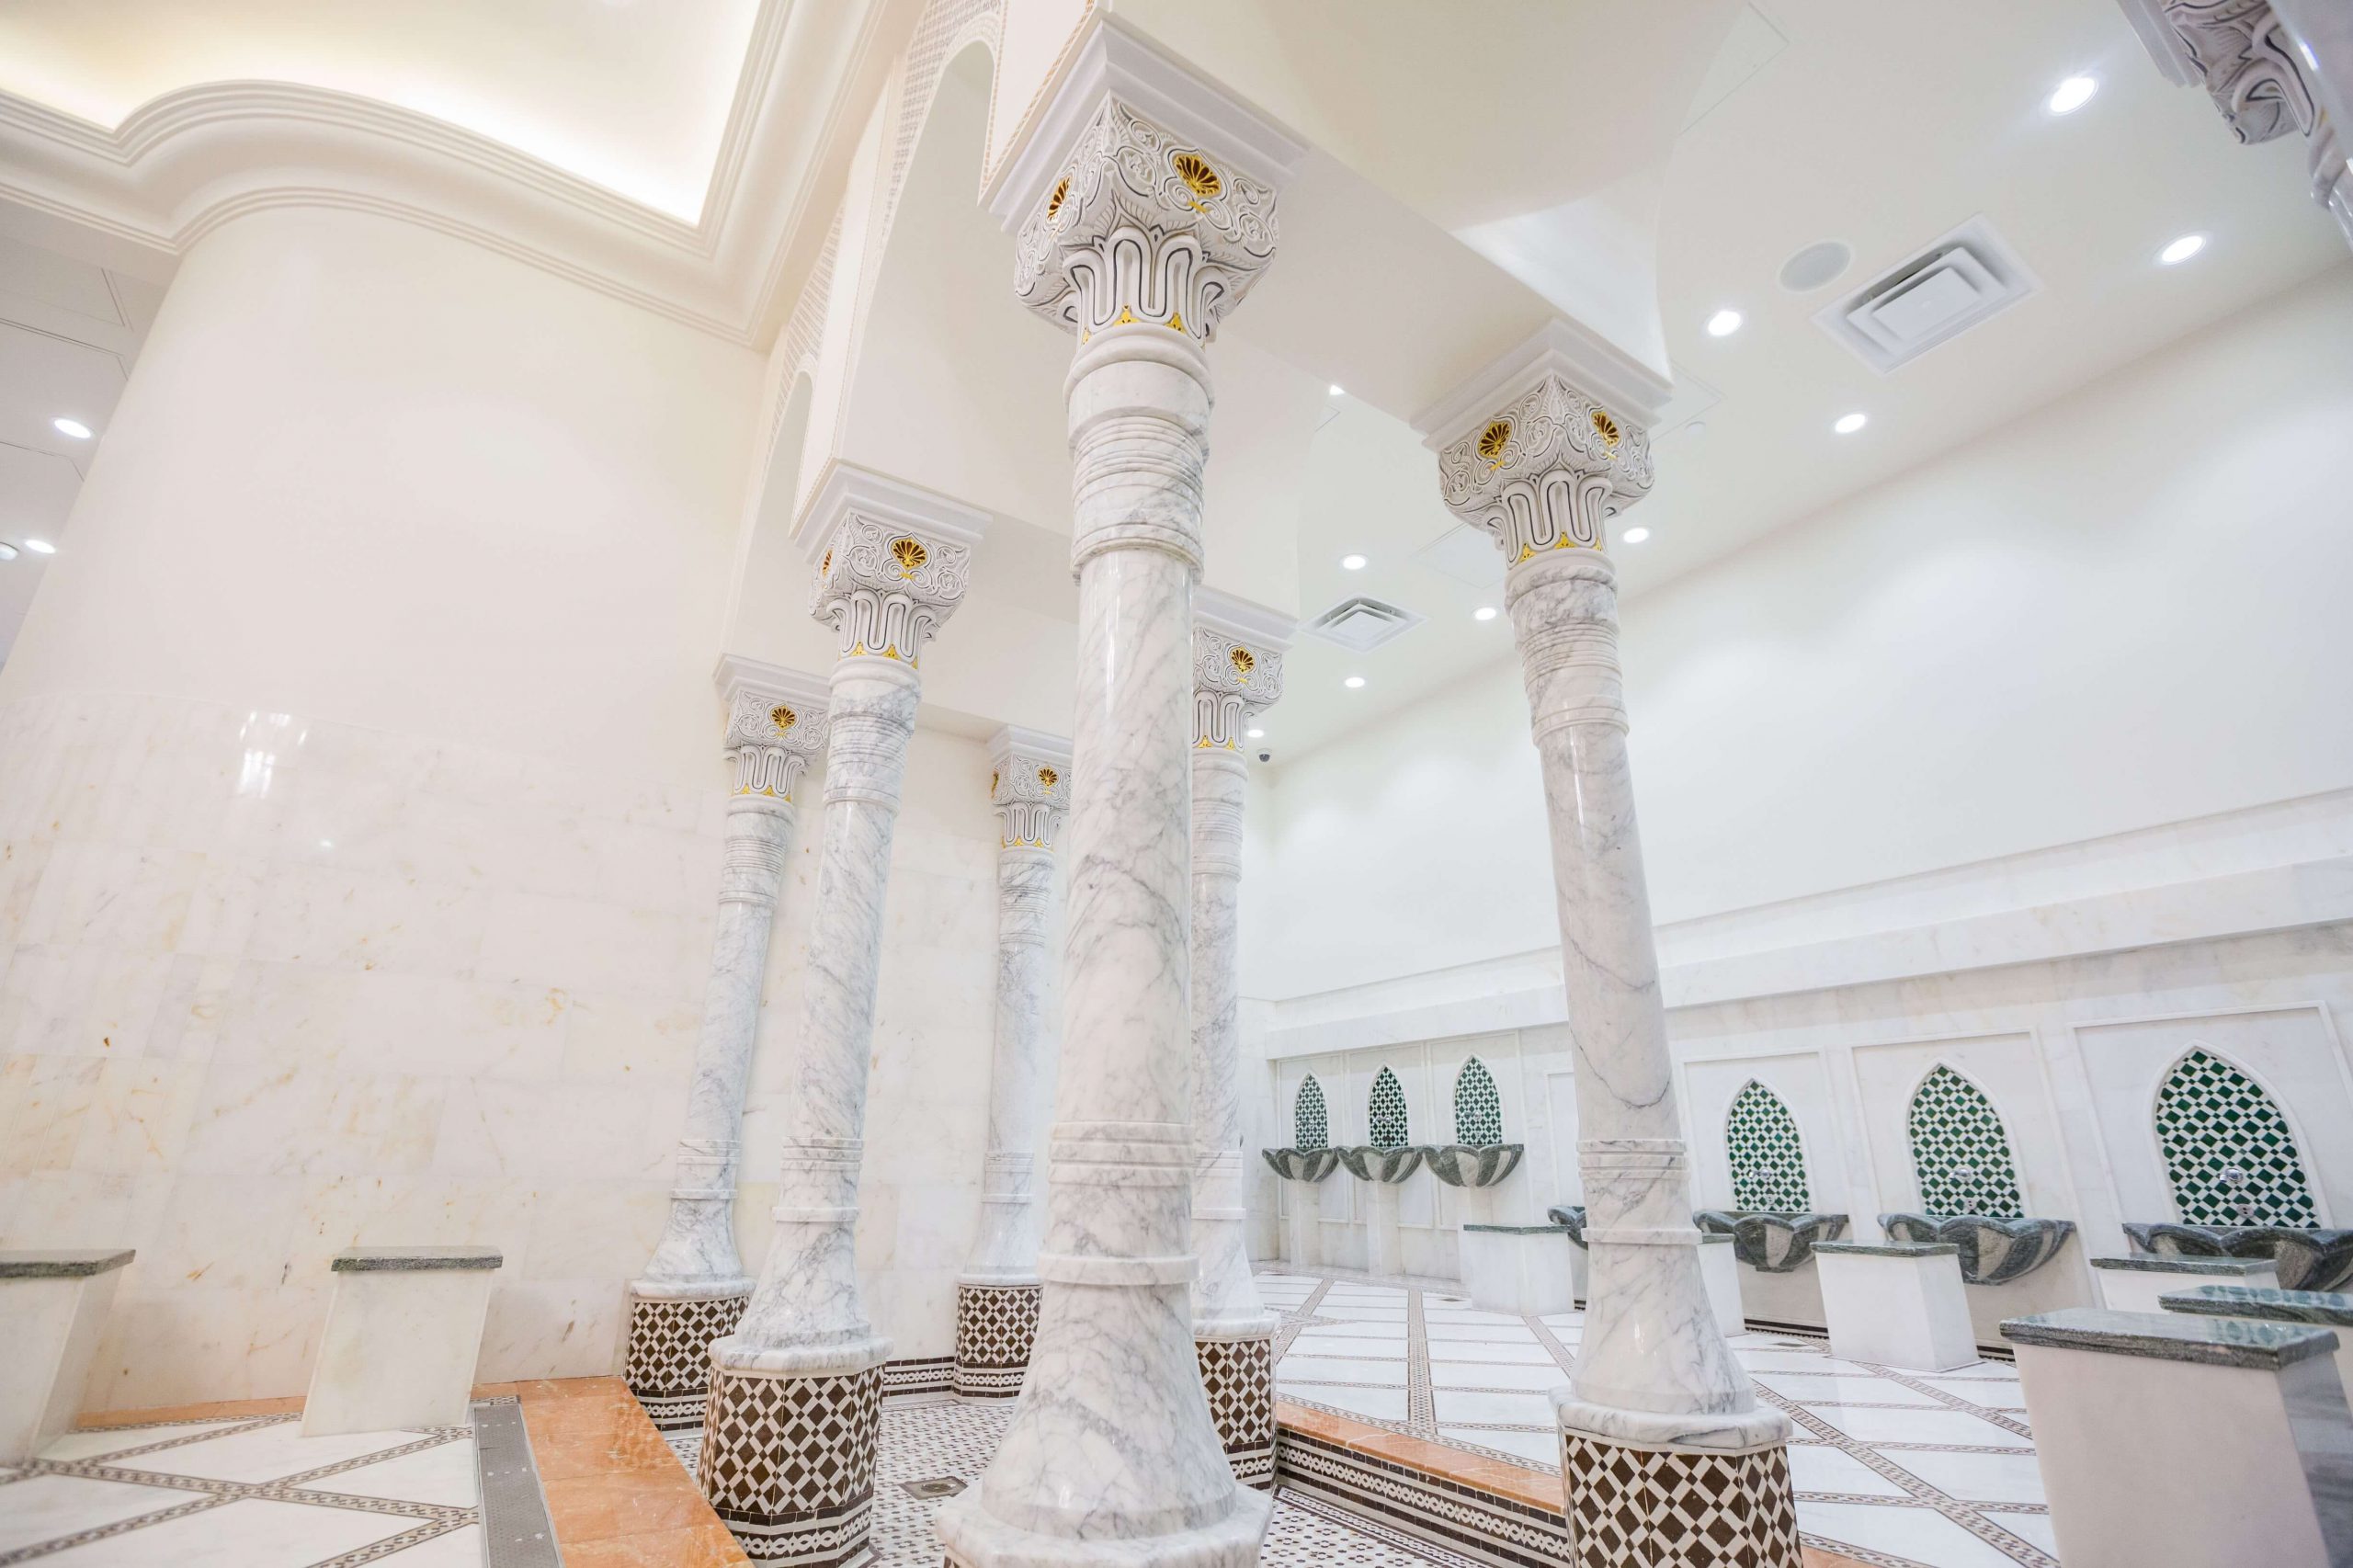 a photograph of the ablution in the mosque which can be used as part of the wedding venue